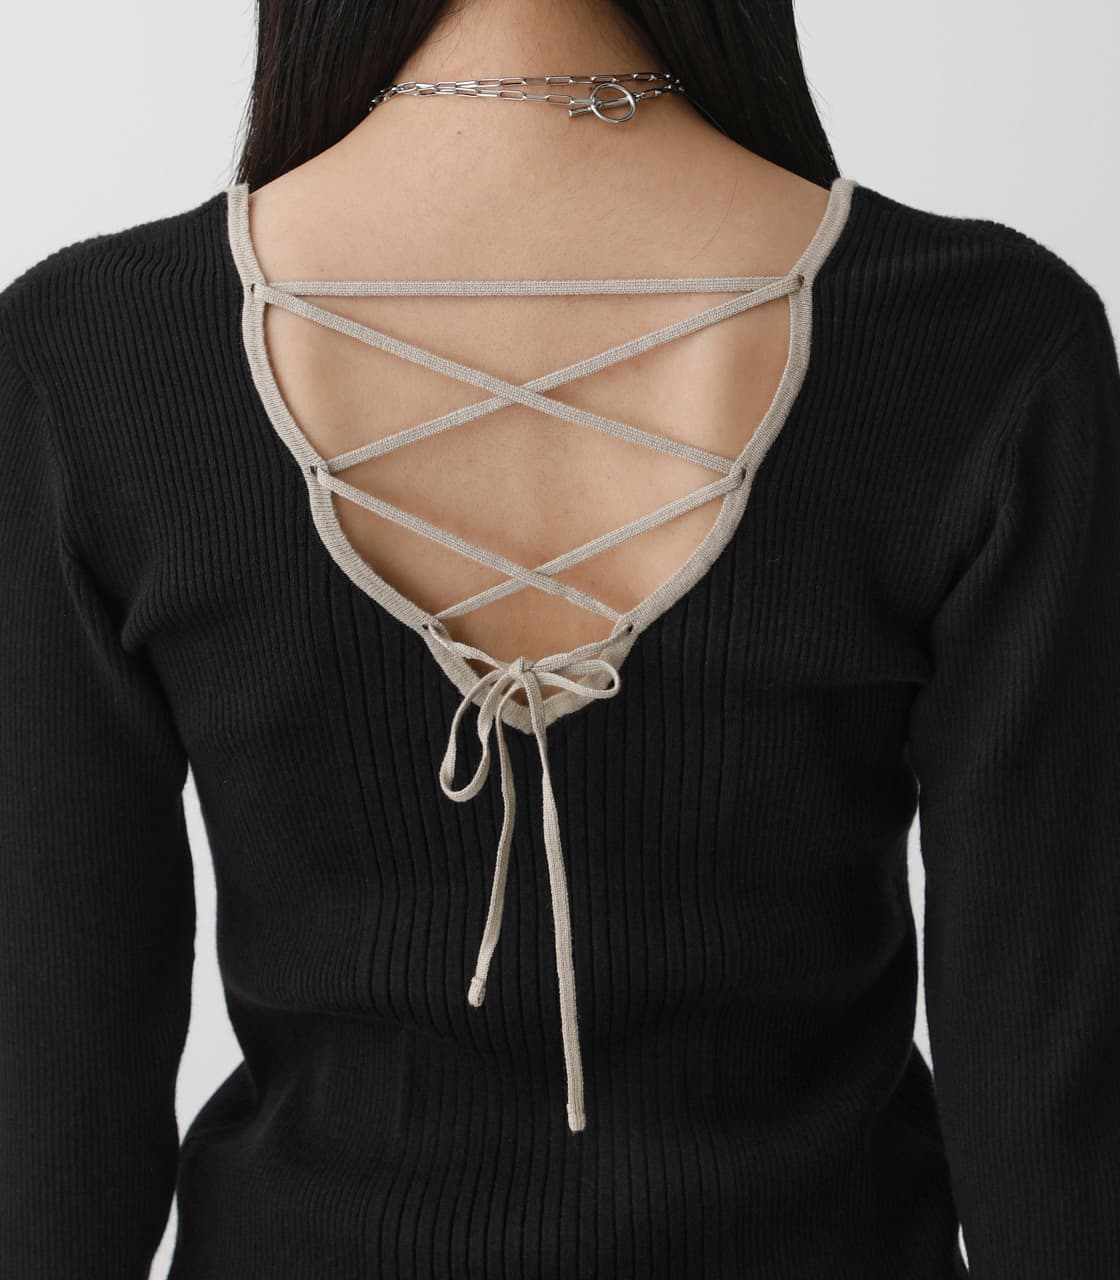 Big Lace-up Knit tops